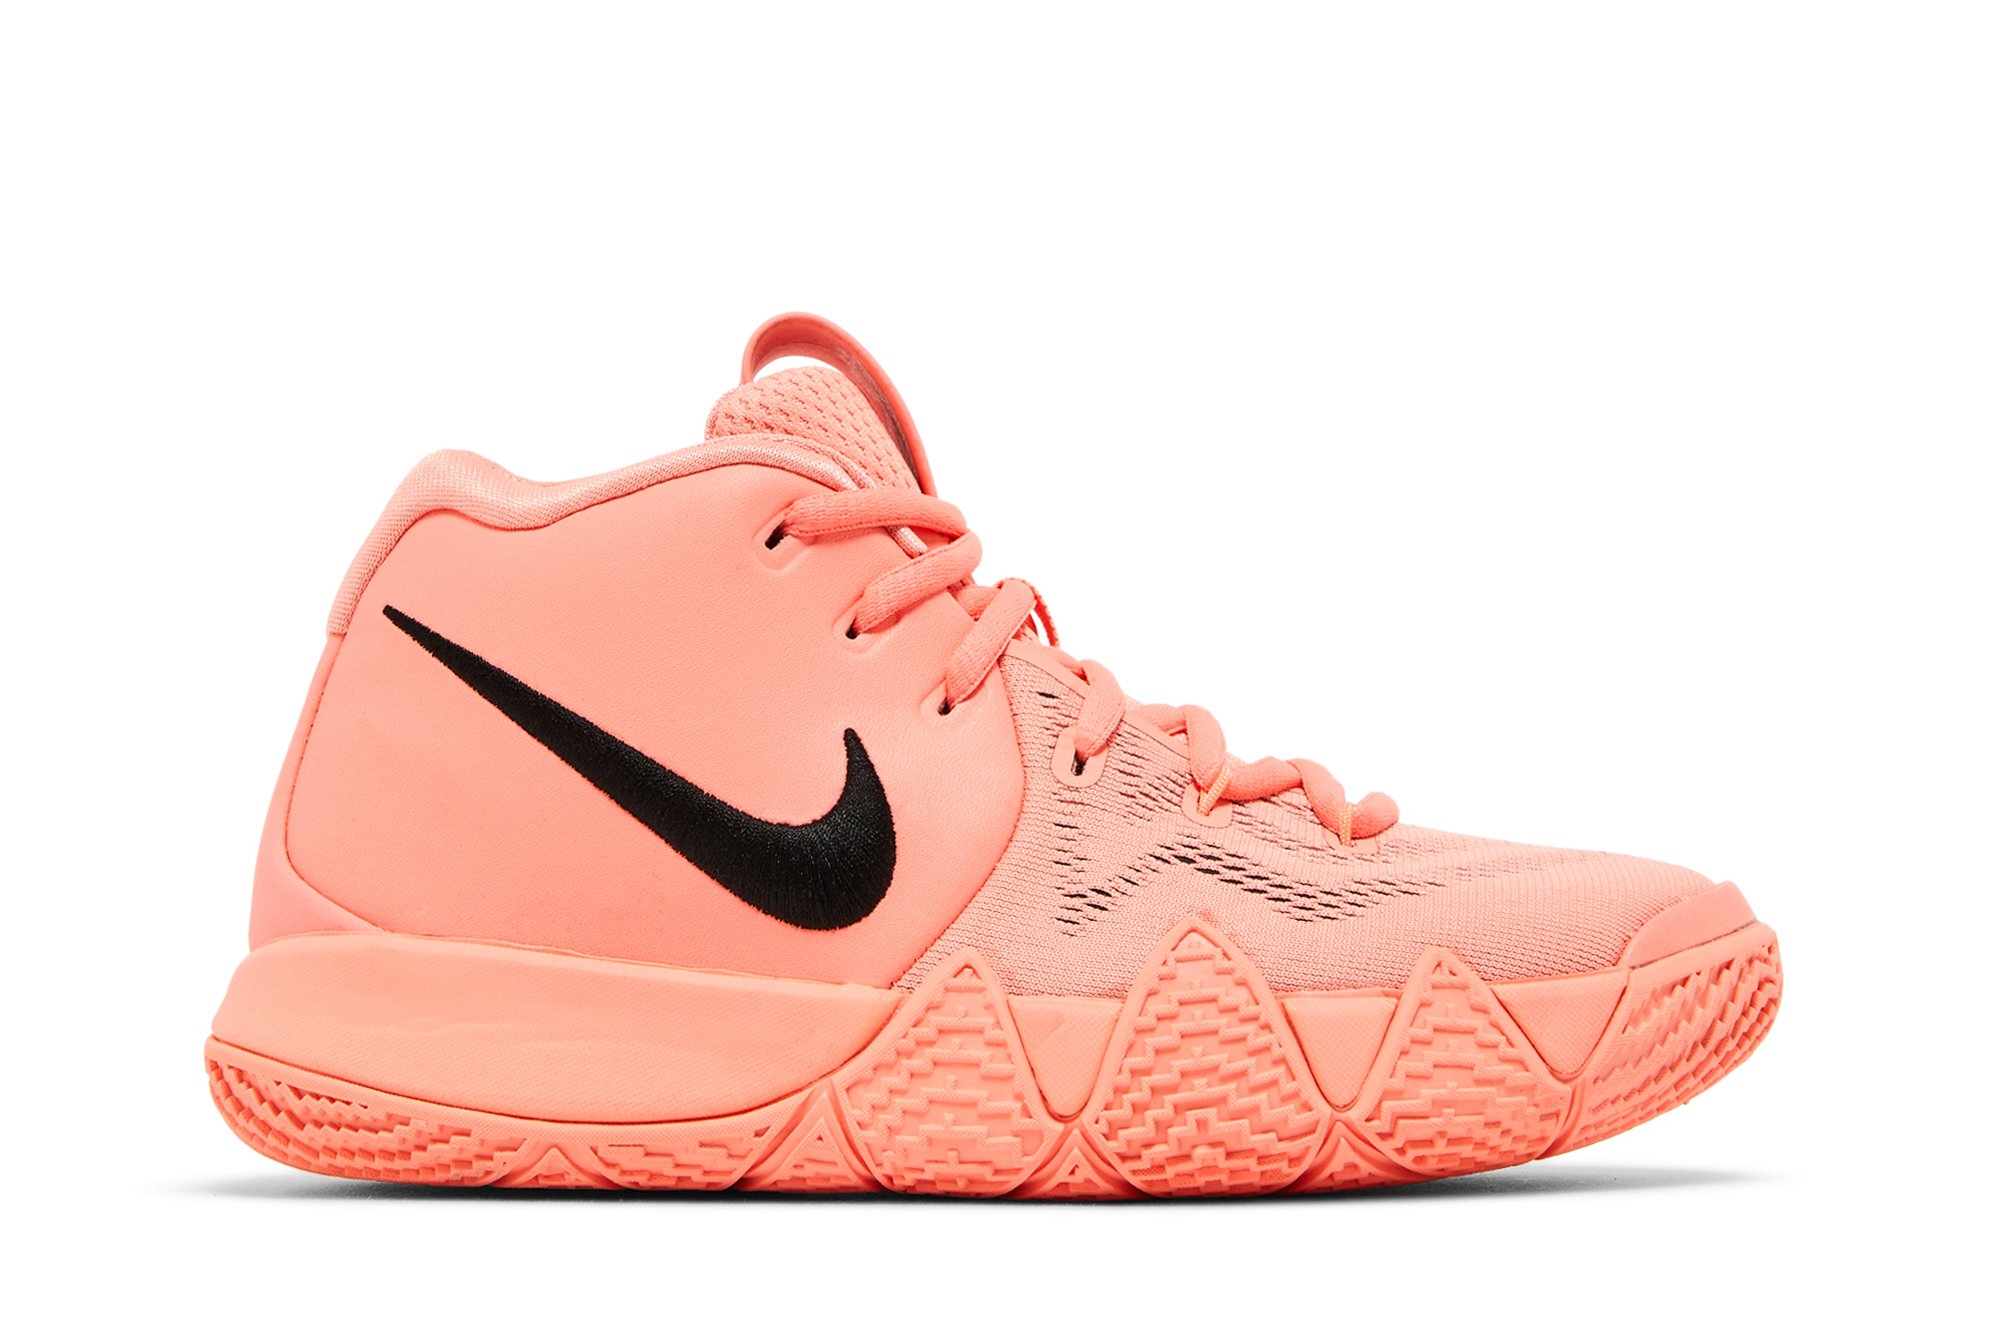 Kyrie 4 GS 'Atomic Pink'